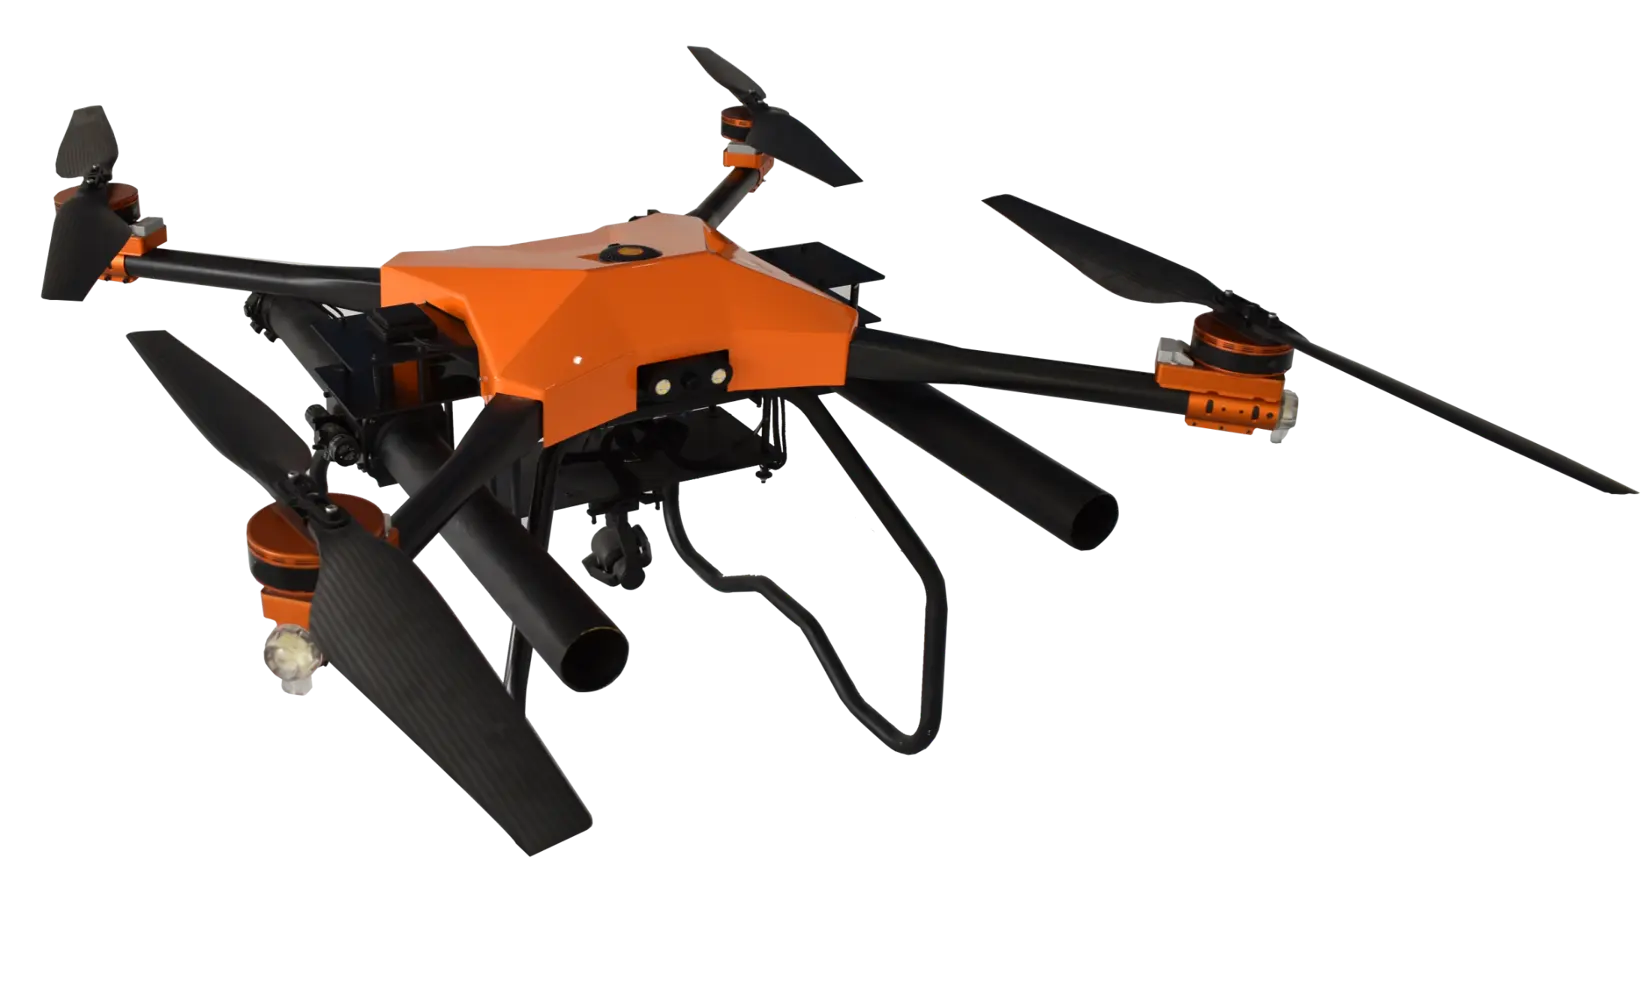 Professional window broken fire fighting drone with competitive price